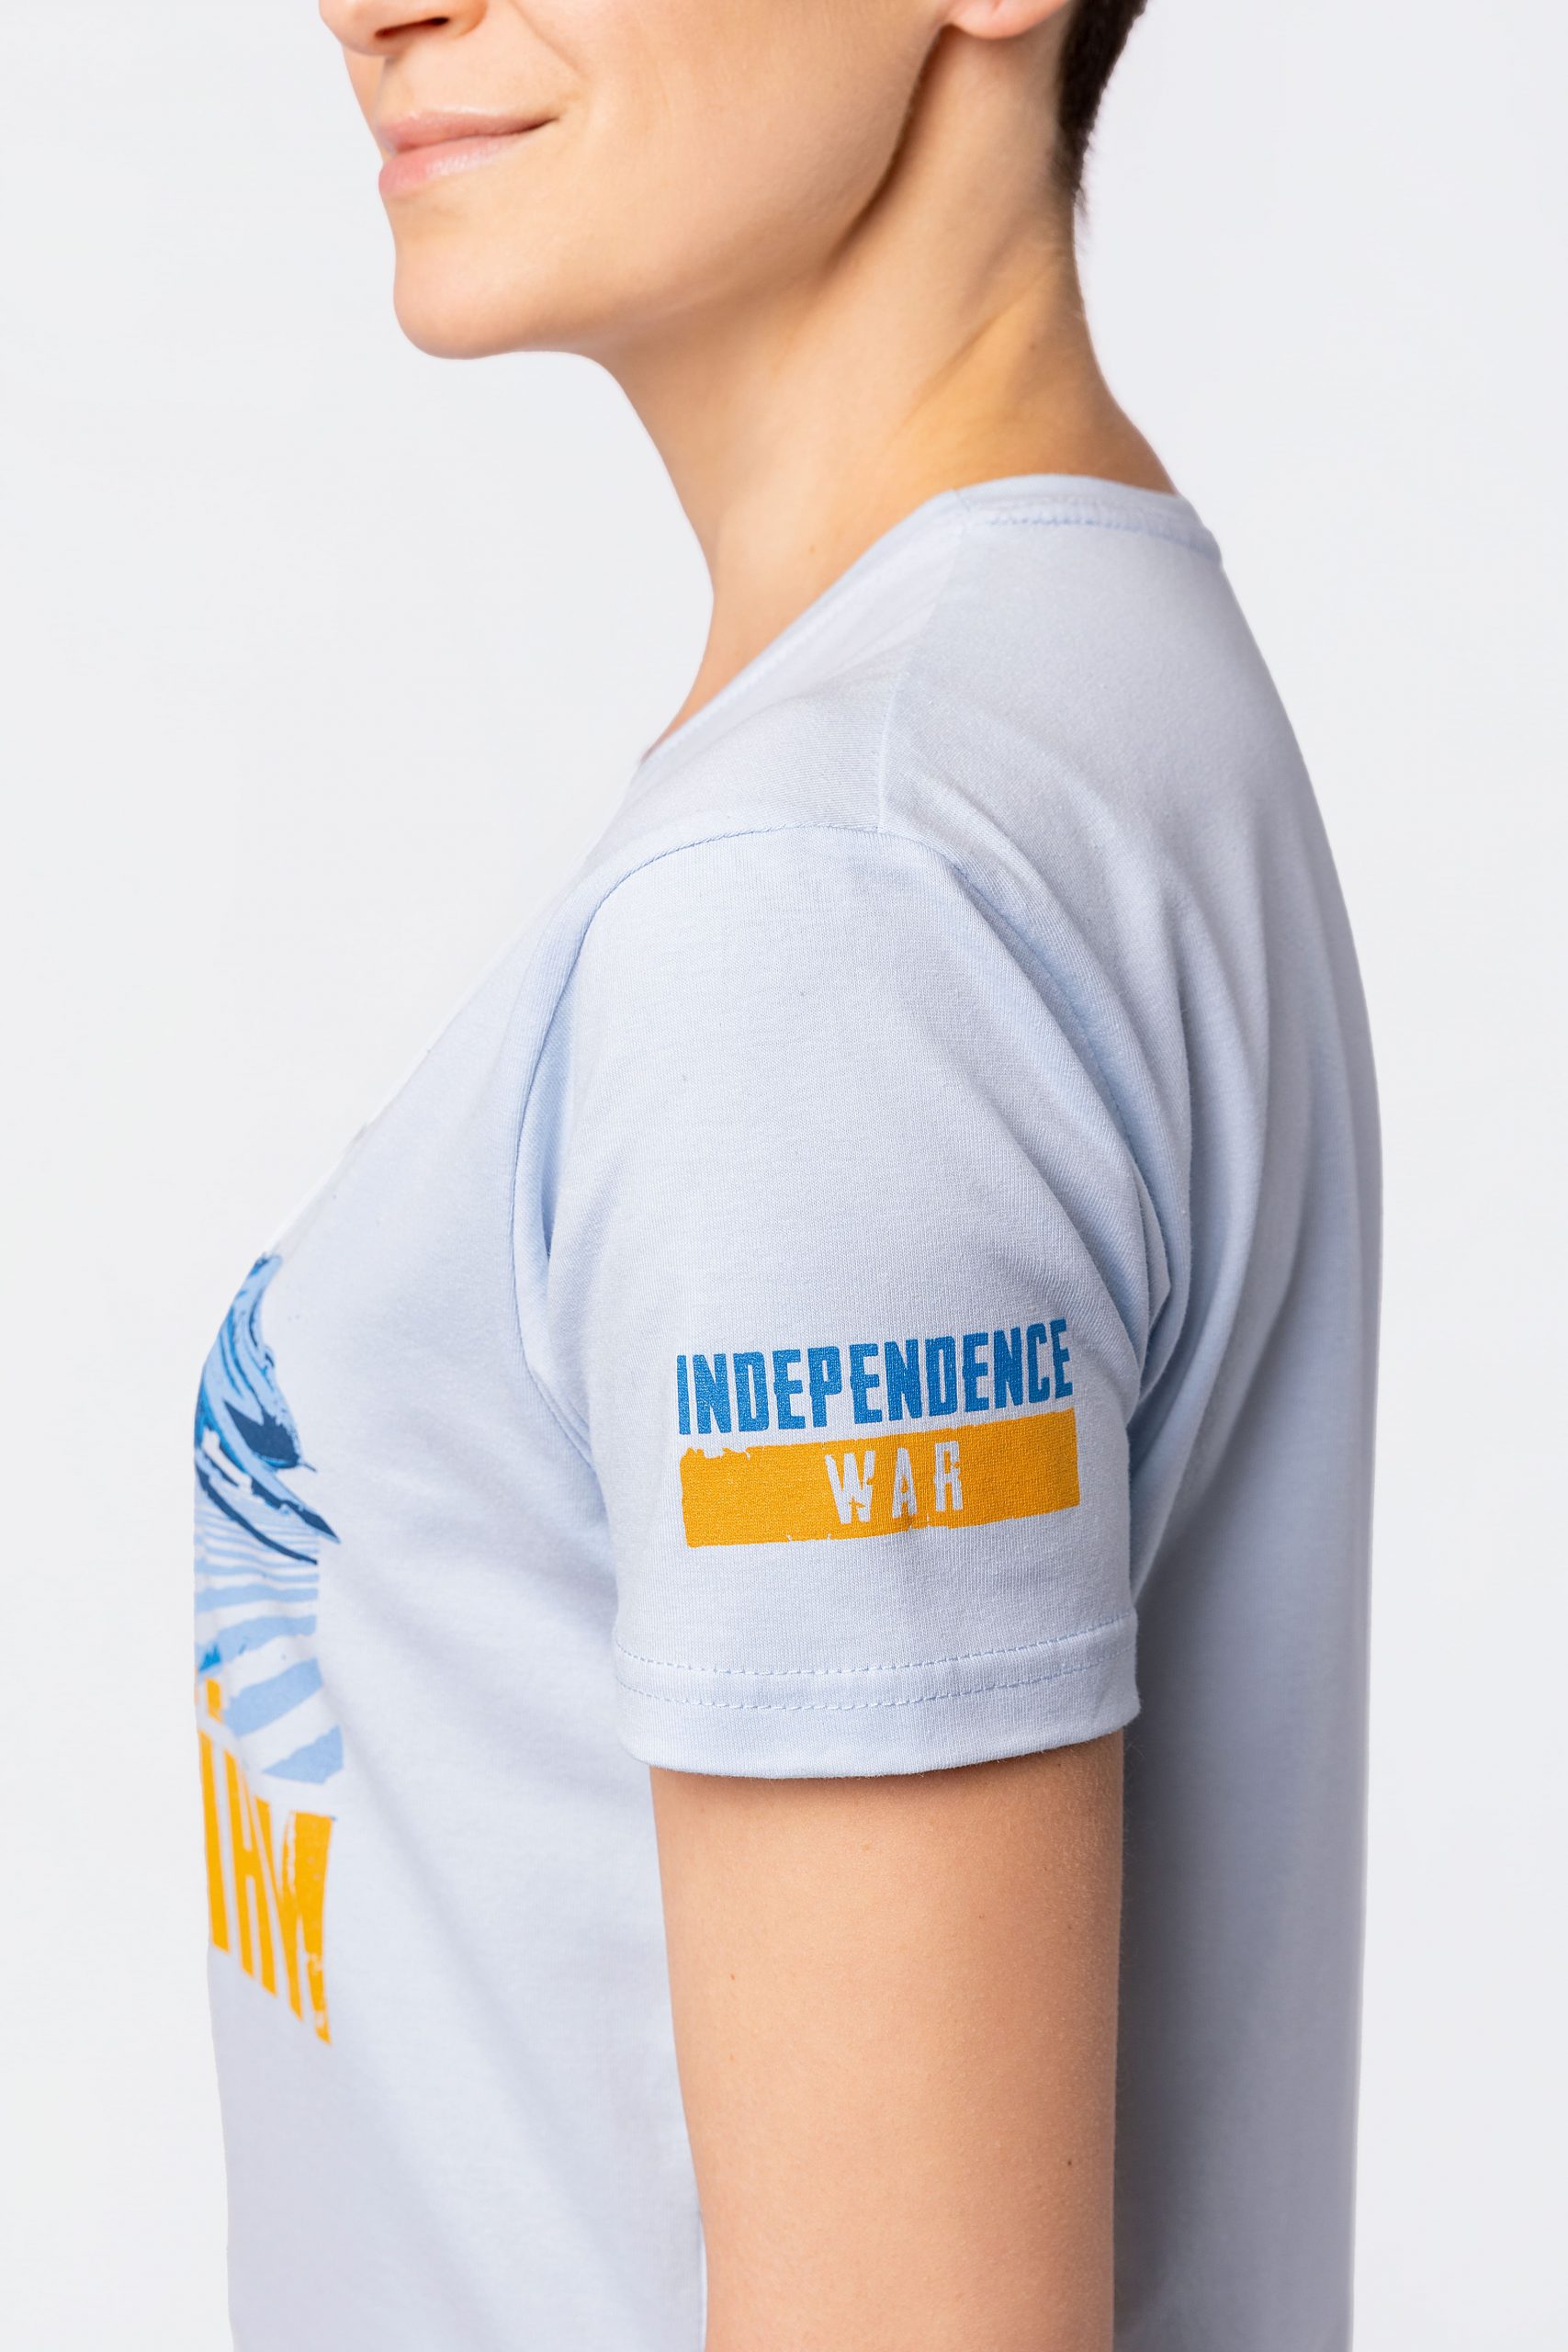 Women's T-Shirt We Are From Ukraine.а. Color light blue. 3.